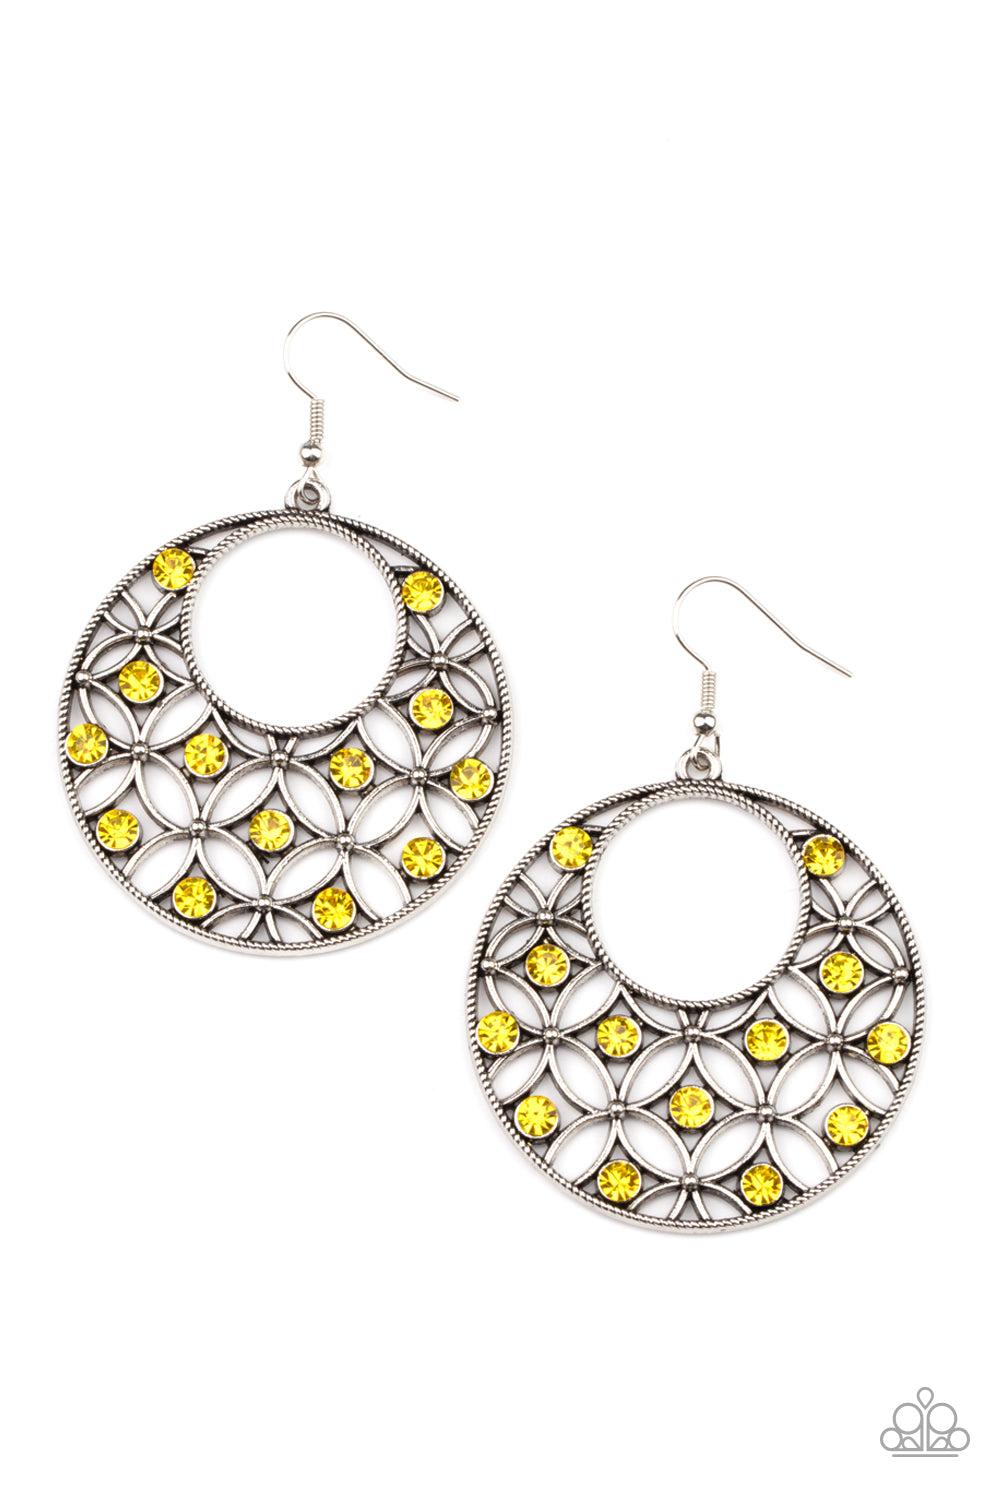 Paparazzi Accessories Garden Garnish - Yellow Earrings - Lady T Accessories